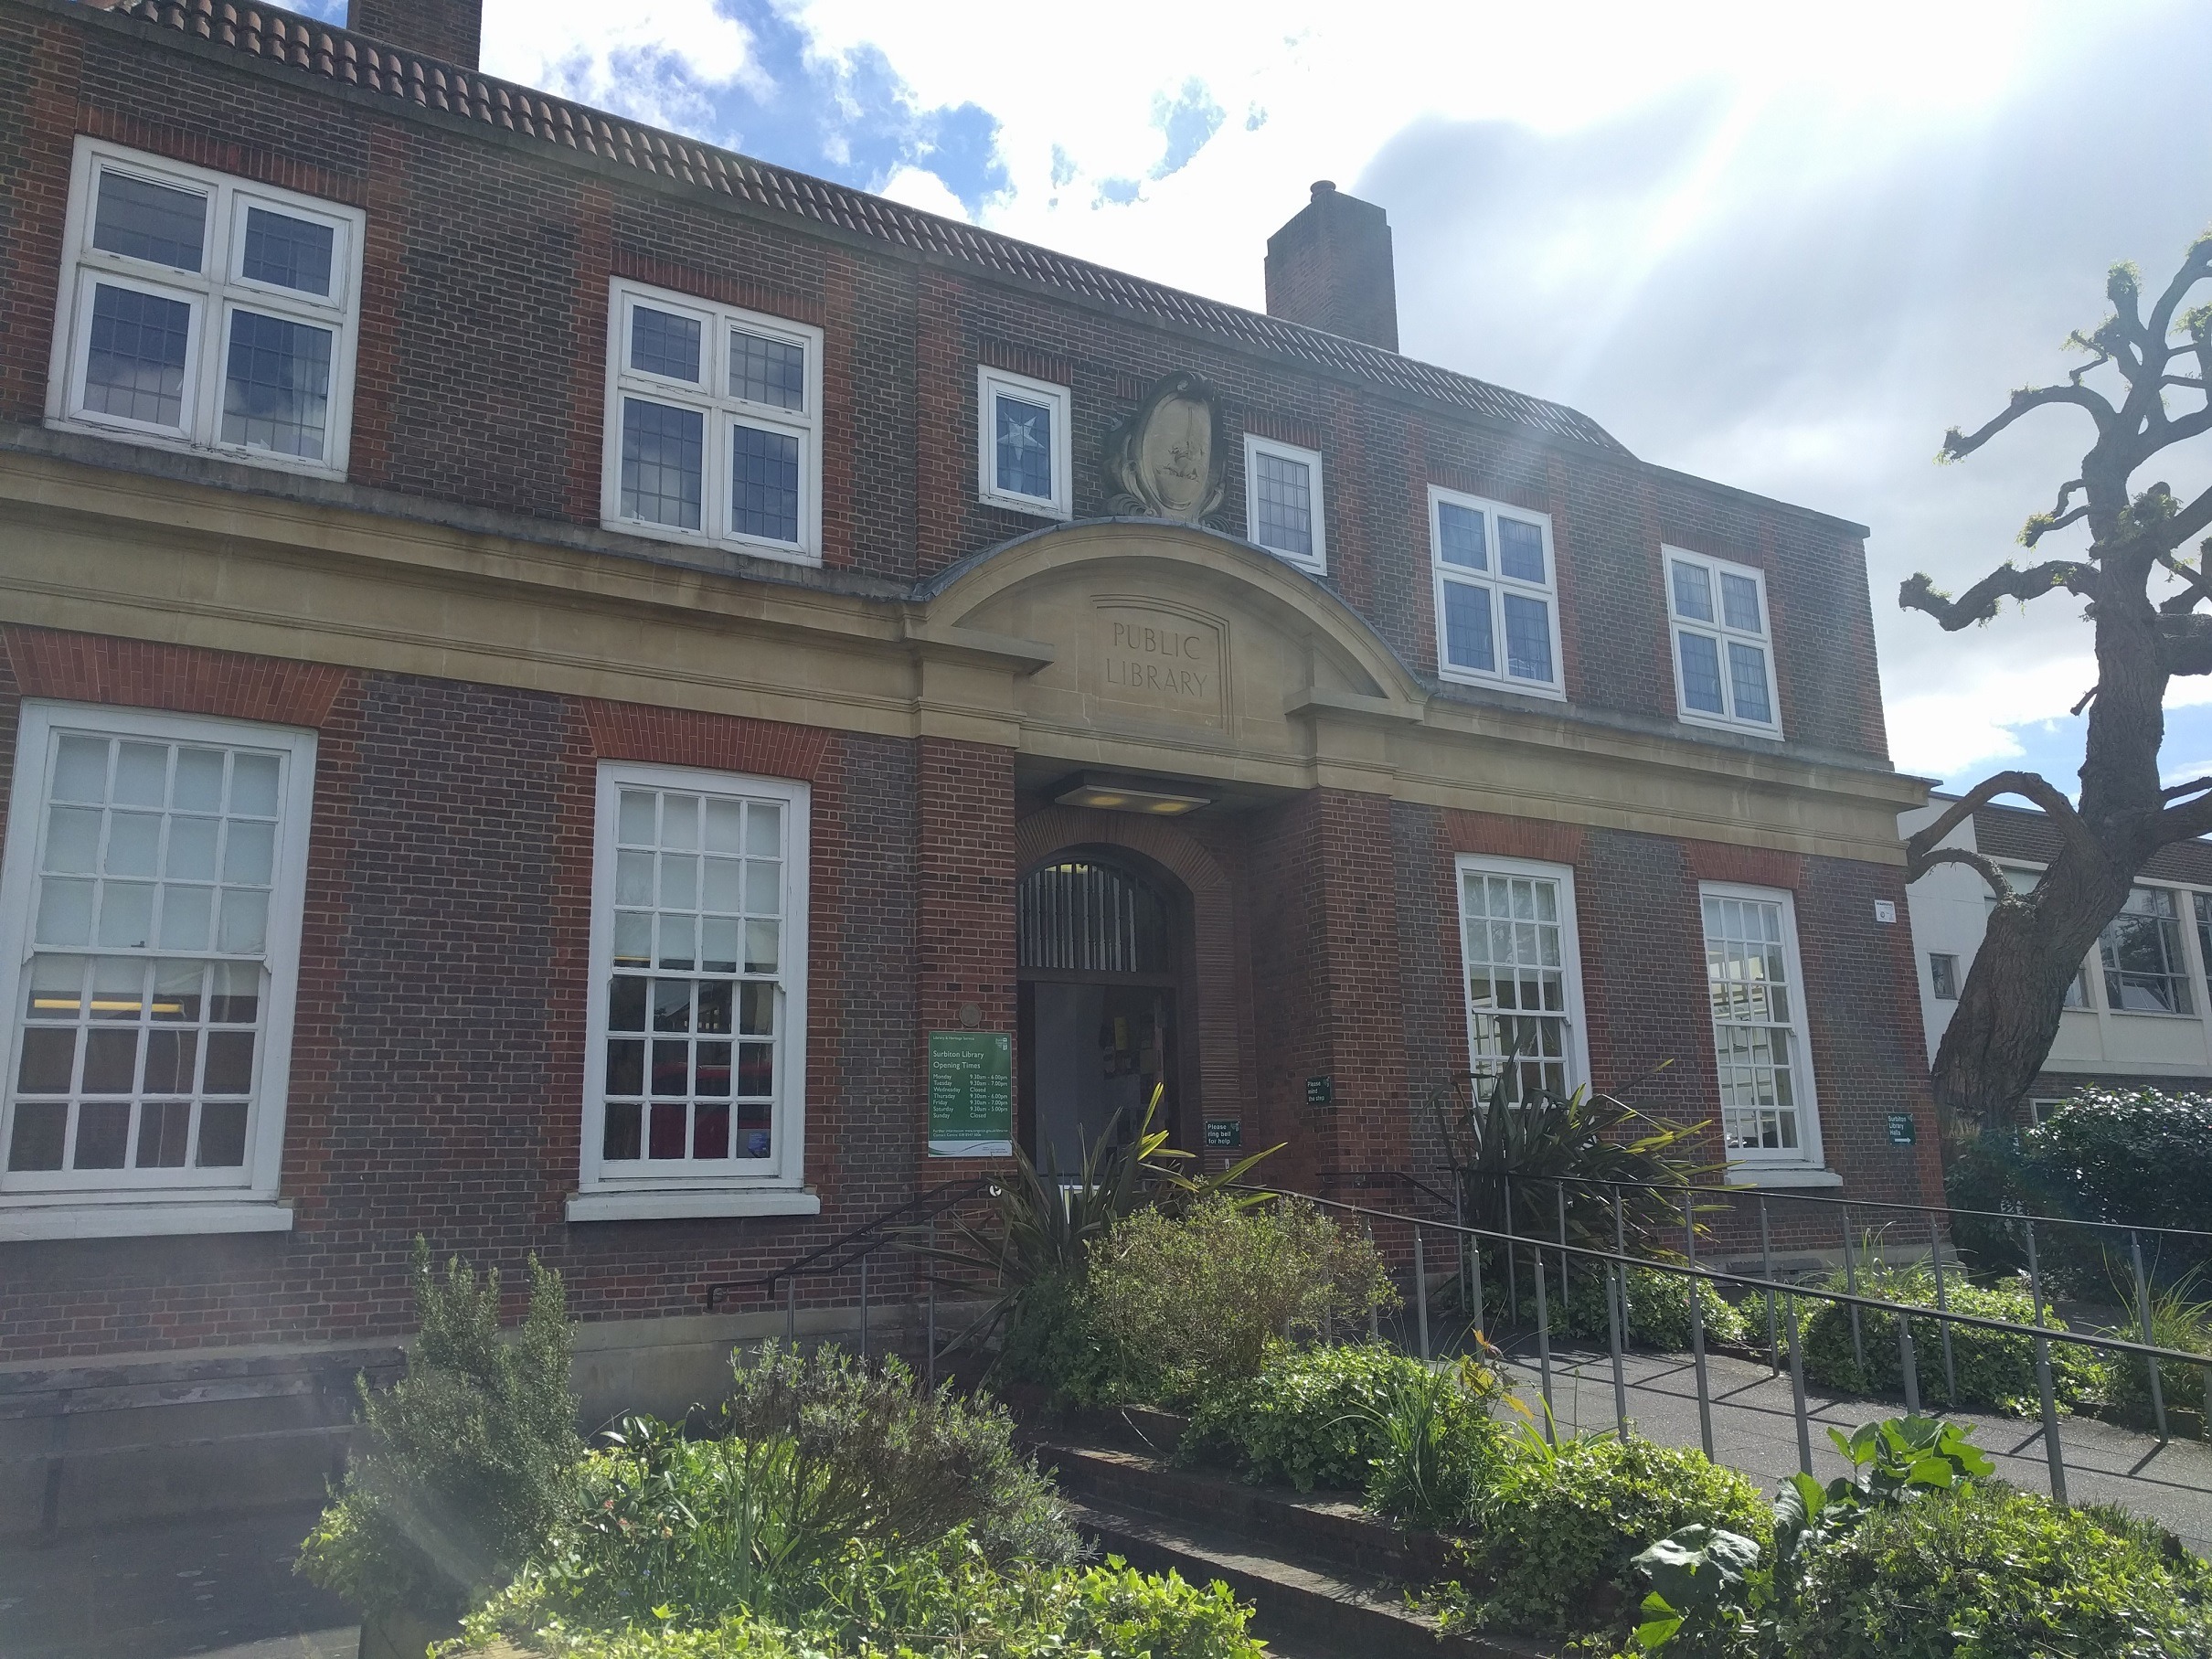 Surbiton library opens its doors after remodelling